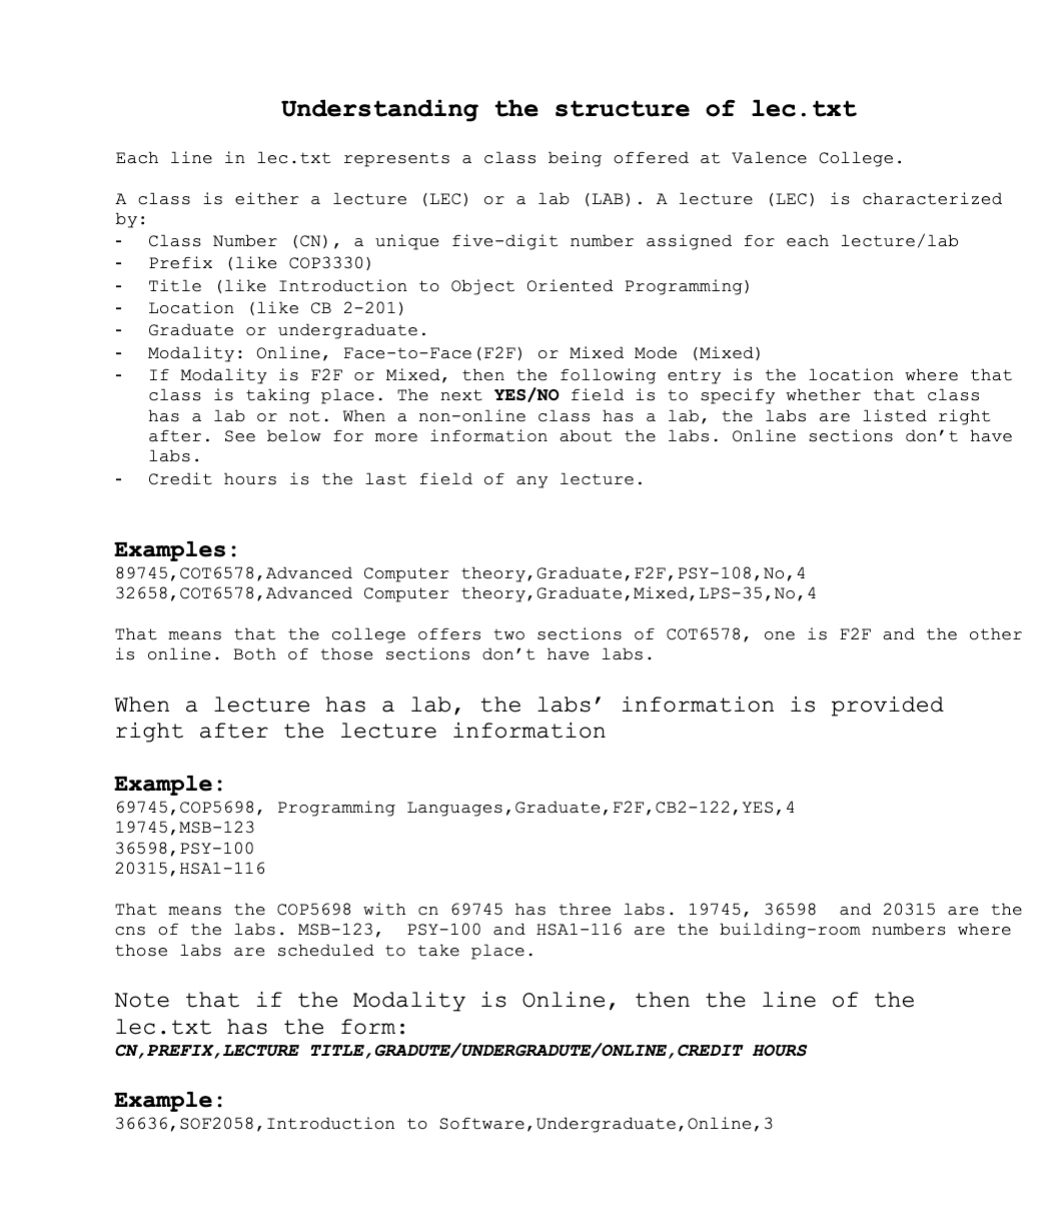 Understanding the structure of lec.txt
Each line in lec.txt represents a class being offered at Valence College.
A class is either a lecture (LEC) or a lab (LAB). A lecture (LEC) is characterized
by:
-
-
-
-
-
Class Number (CN), a unique five-digit number assigned for each lecture/lab
Prefix (like COP3330)
Title (like Introduction to Object Oriented Programming)
Location (like CB 2-201)
Graduate or undergraduate.
Modality: Online, Face-to-Face (F2F) or Mixed Mode (Mixed)
If Modality is F2F or Mixed, then the following entry is the location where that
class is taking place. The next YES/NO field is to specify whether that class
has a lab or not. When a non-online class has a lab, the labs are listed right
after. See below for more information about the labs. Online sections don't have
labs.
Credit hours is the last field of any lecture.
Examples:
89745, COT6578, Advanced Computer theory, Graduate, F2F, PSY-108, No, 4
32658, COT6578, Advanced Computer theory, Graduate, Mixed, LPS-35, No, 4
That means that the college offers two sections of COT6578, one is F2F and the other
is online. Both of those sections don't have labs.
When a lecture has a lab, the labs' information is provided
right after the lecture information
Example:
69745,COP5698, Programming Languages, Graduate, F2F, CB2-122, YES, 4
19745, MSB-123
36598, PSY-100
20315, HSA1-116
That means the COP5698 with cn 69745 has three labs. 19745, 36598 and 20315 are the
cns of the labs. MSB-123, PSY-100 and HSA1-116 are the building-room numbers where
those labs are scheduled to take place.
Note that if the Modality is Online, then the line of the
lec.txt has the form:
CN, PREFIX, LECTURE TITLE, GRADUTE/UNDERGRADUTE/ONLINE, CREDIT HOURS
Example:
36636, SOF2058, Introduction to Software, Undergraduate, Online, 3